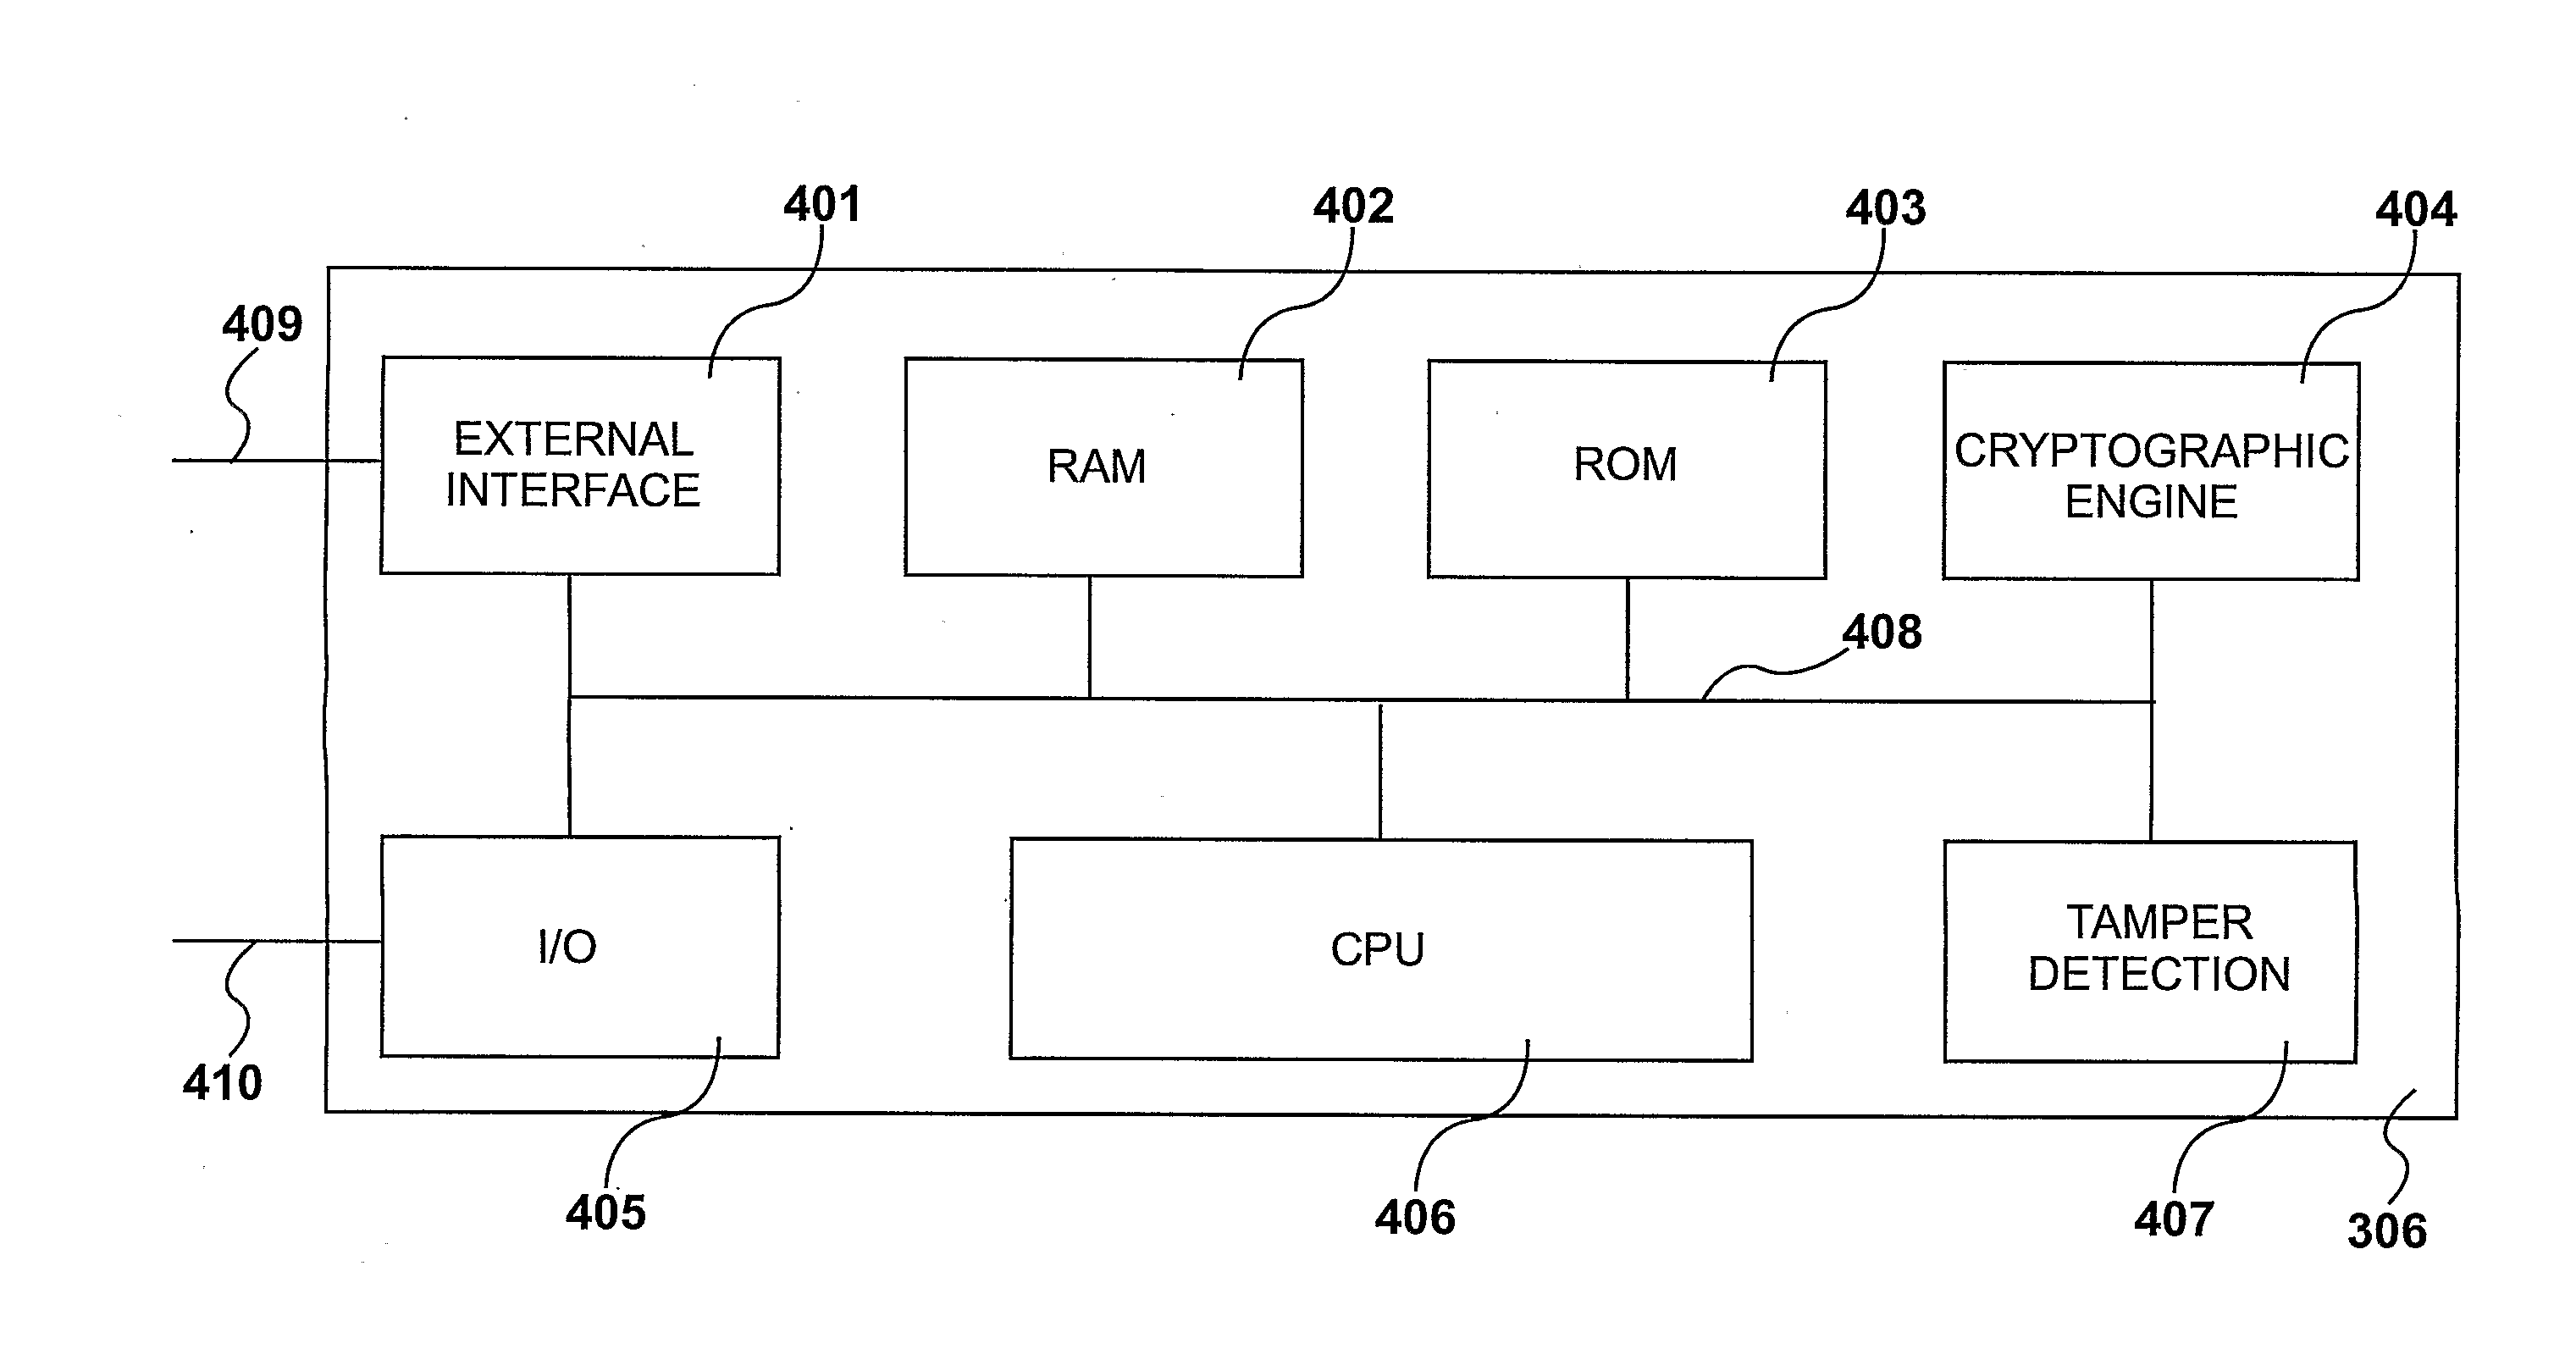 Facilitating secure communication between utility devices